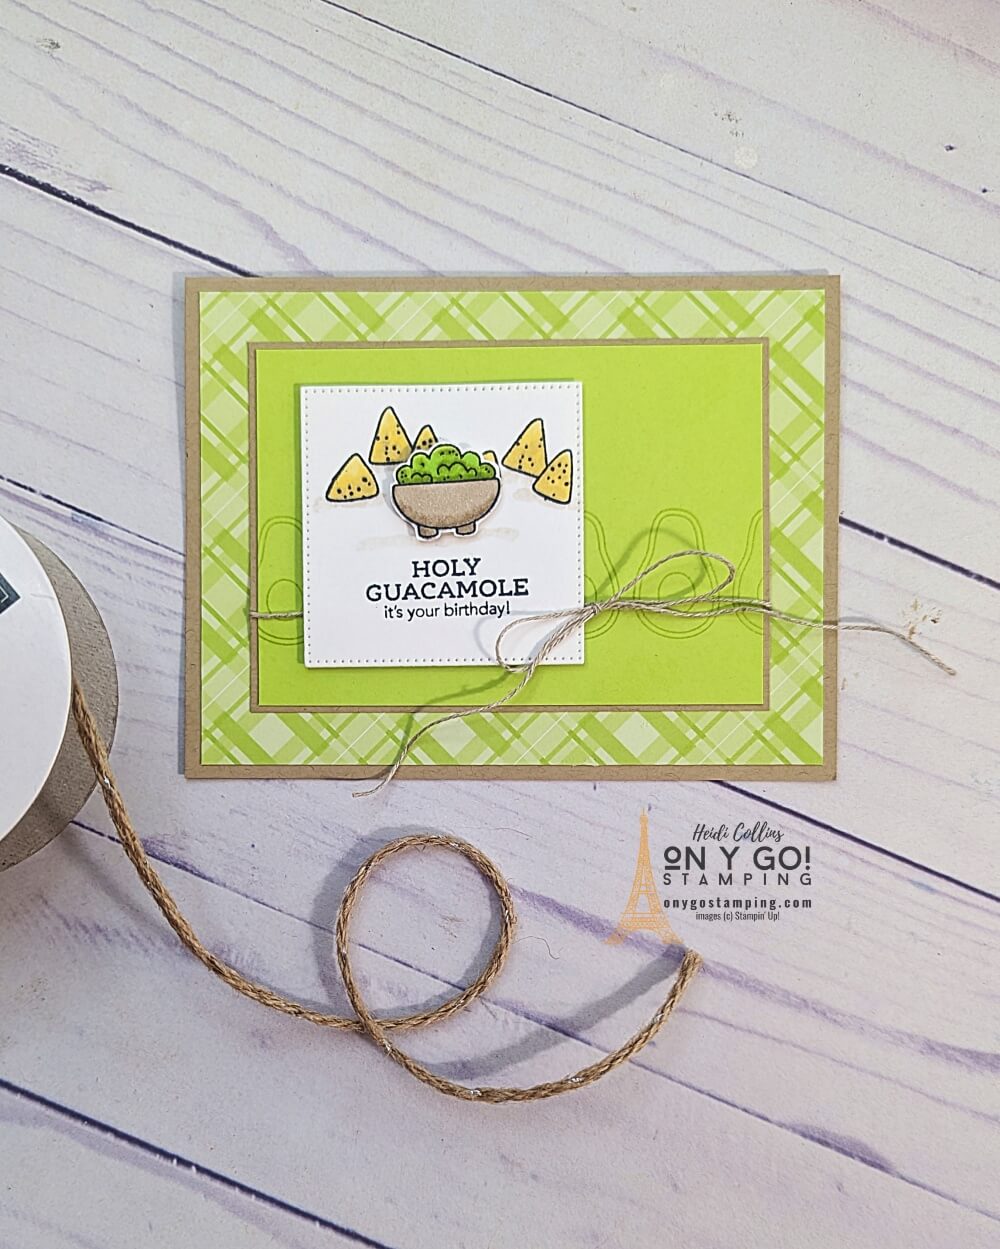 If you're looking for a unique way to celebrate a special birthday, the Taco Fiesta Stamp Set from Stampin' Up! is the perfect choice! This colorful and fun set of handmade cards adds plenty of zest to your recipient's birthday celebration, with its cheerful mix of tacos, pinatas, sombreros, and bright, festive colors. With this festive stamp set, you can create a handmade birthday card that will leave a lasting impression.